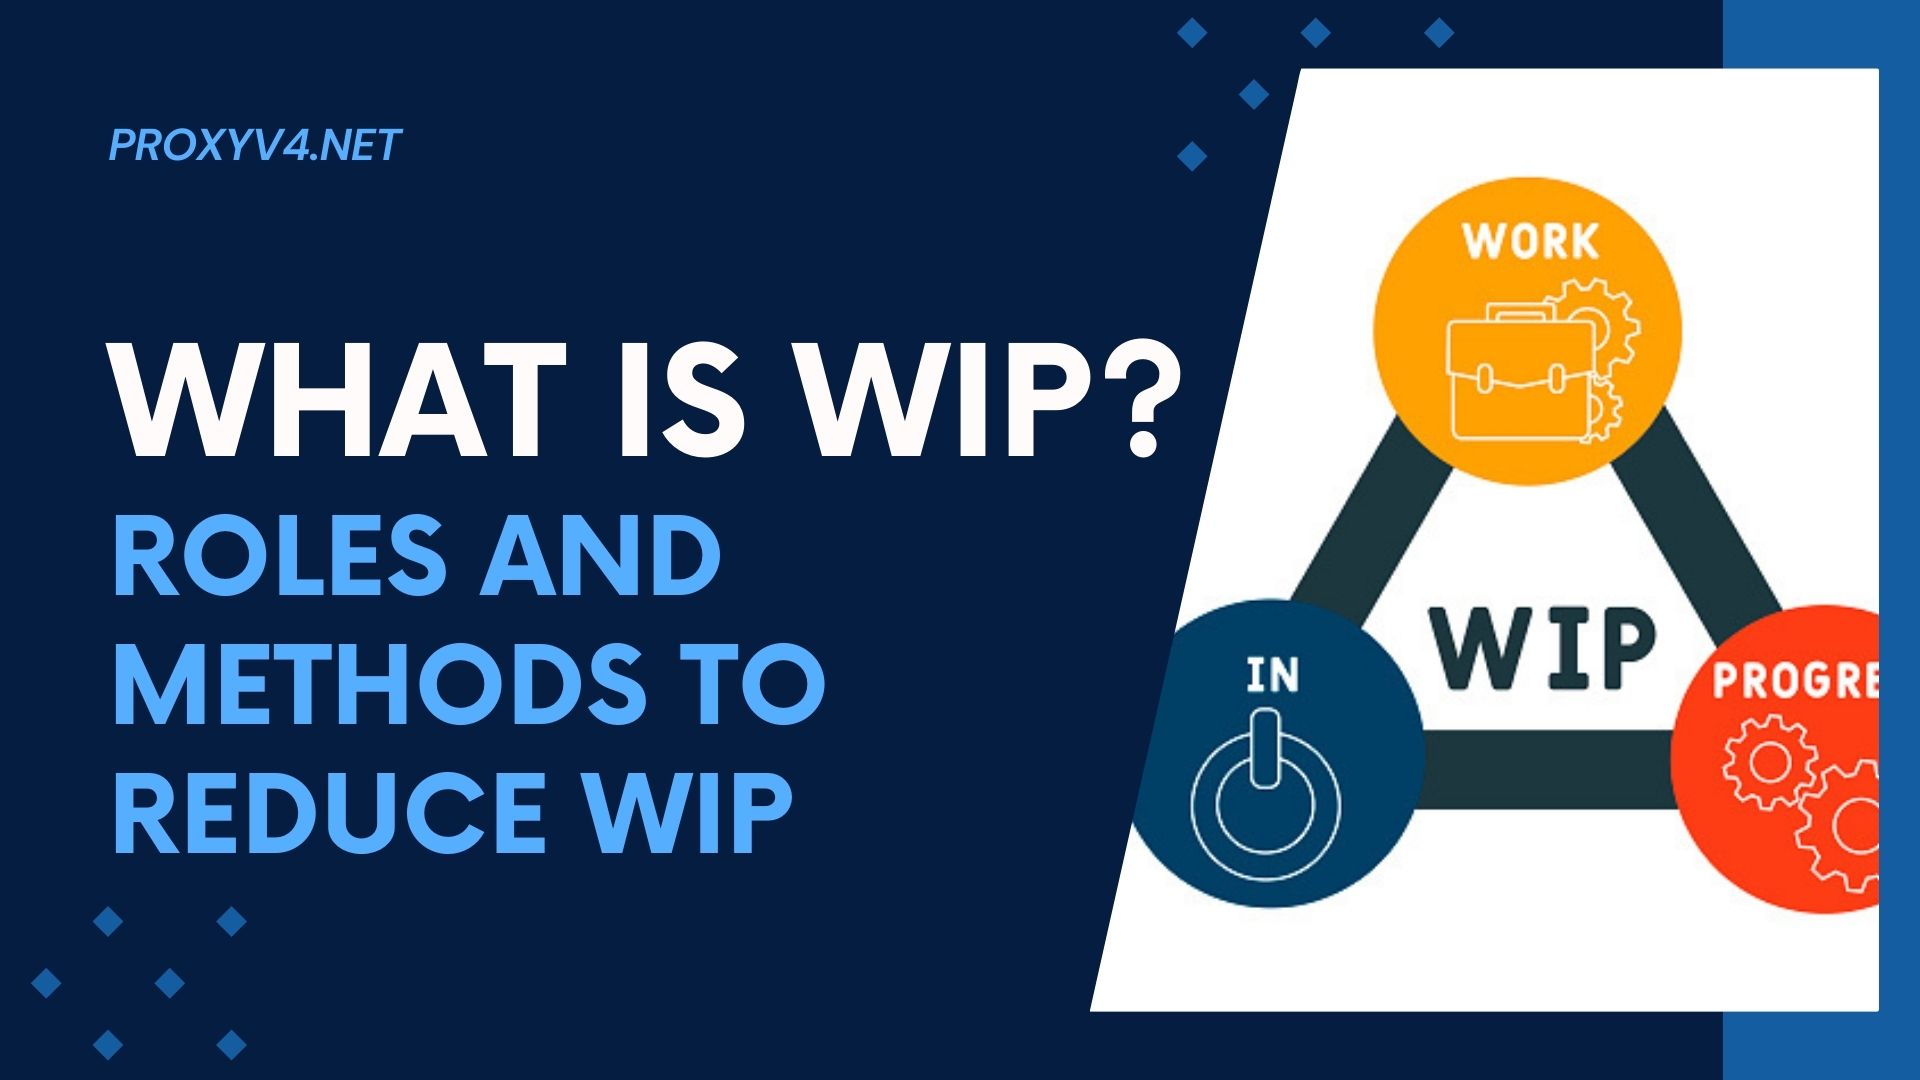 What is WIP? Roles and methods to reduce WIP